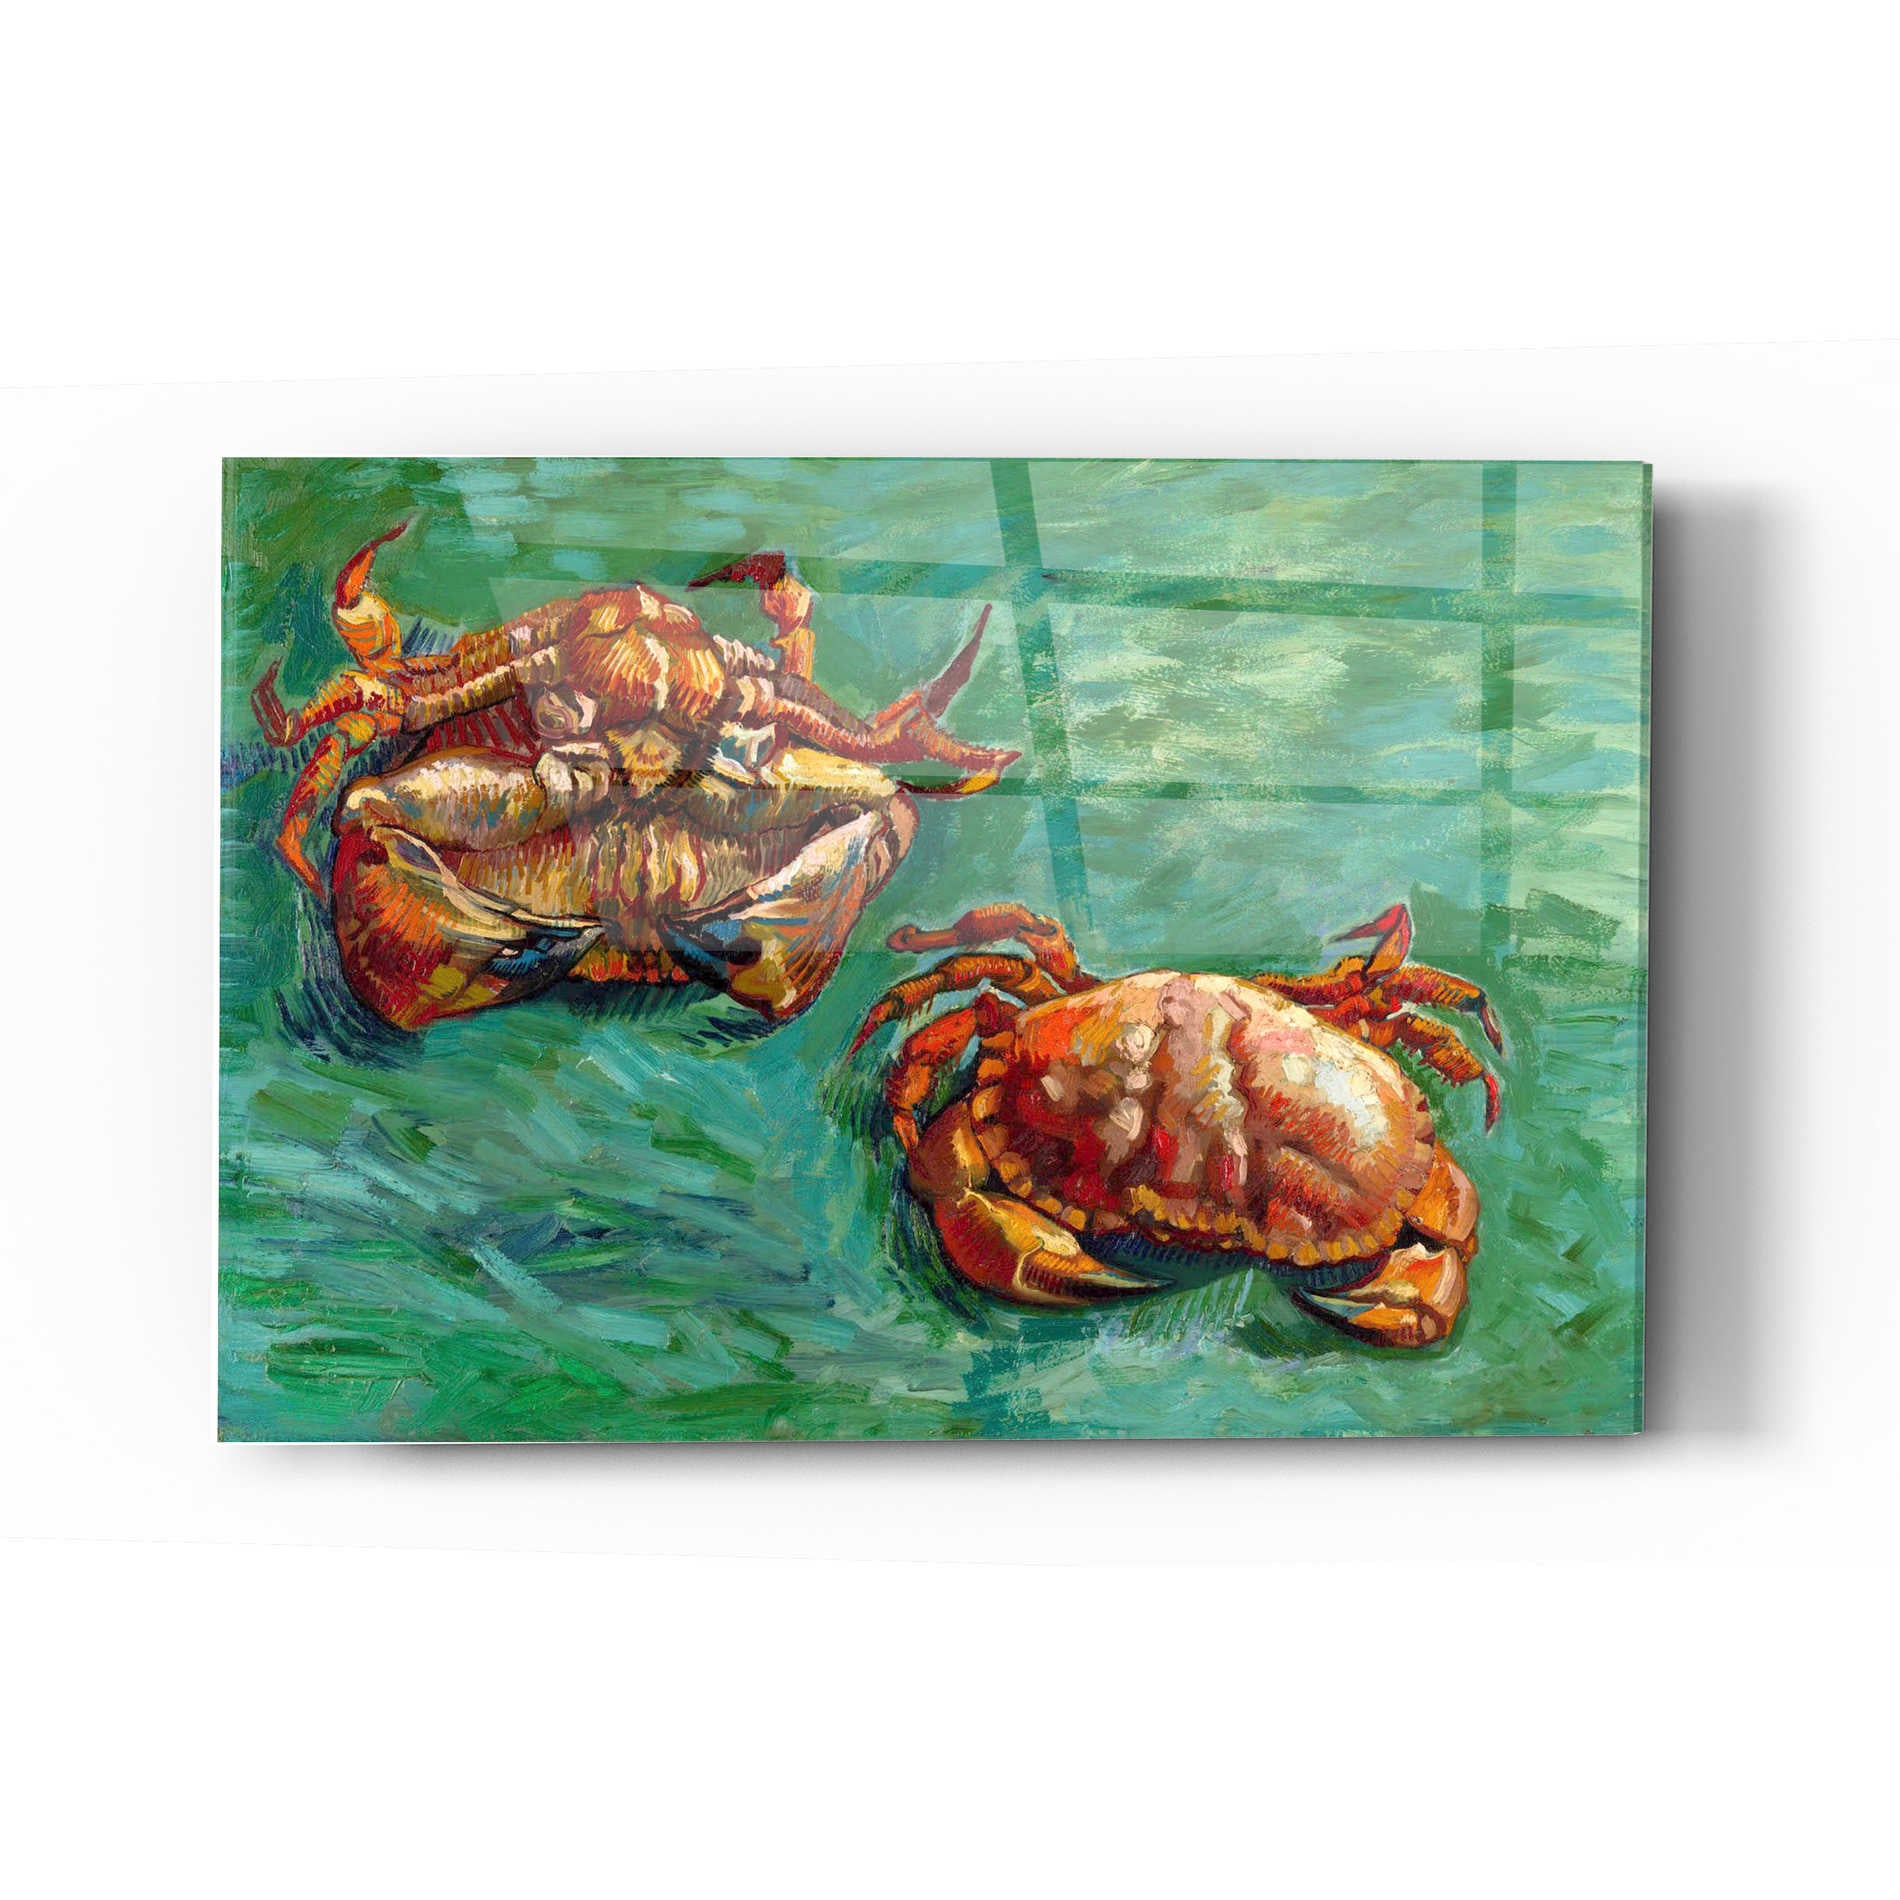 Epic Art 'Two Crabs' by Vincent Van Gogh Acrylic Glass Wall Art,16x24